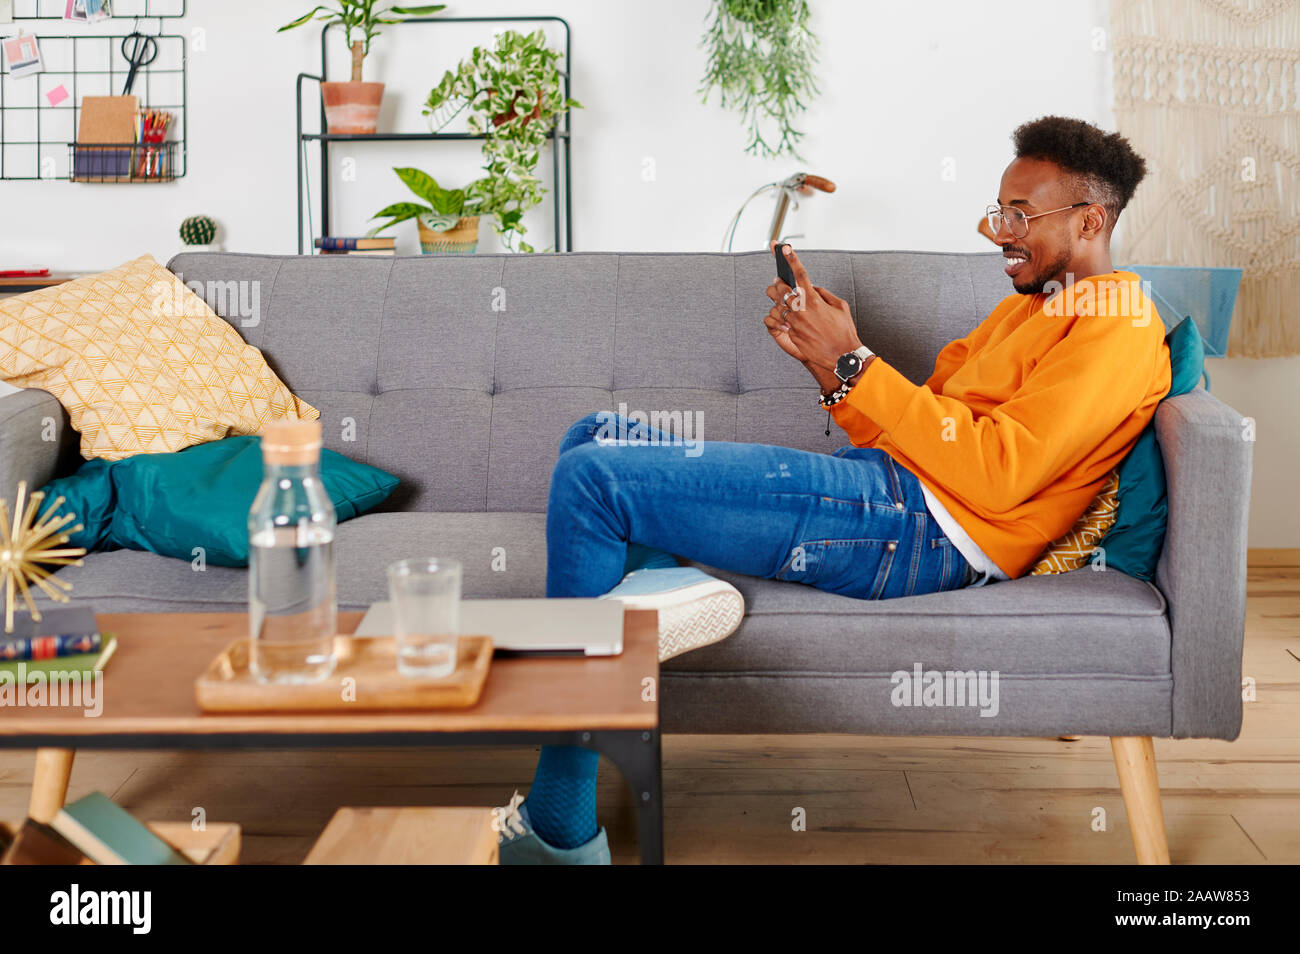 Young smiling man sitting on a couch et using smartphone Banque D'Images